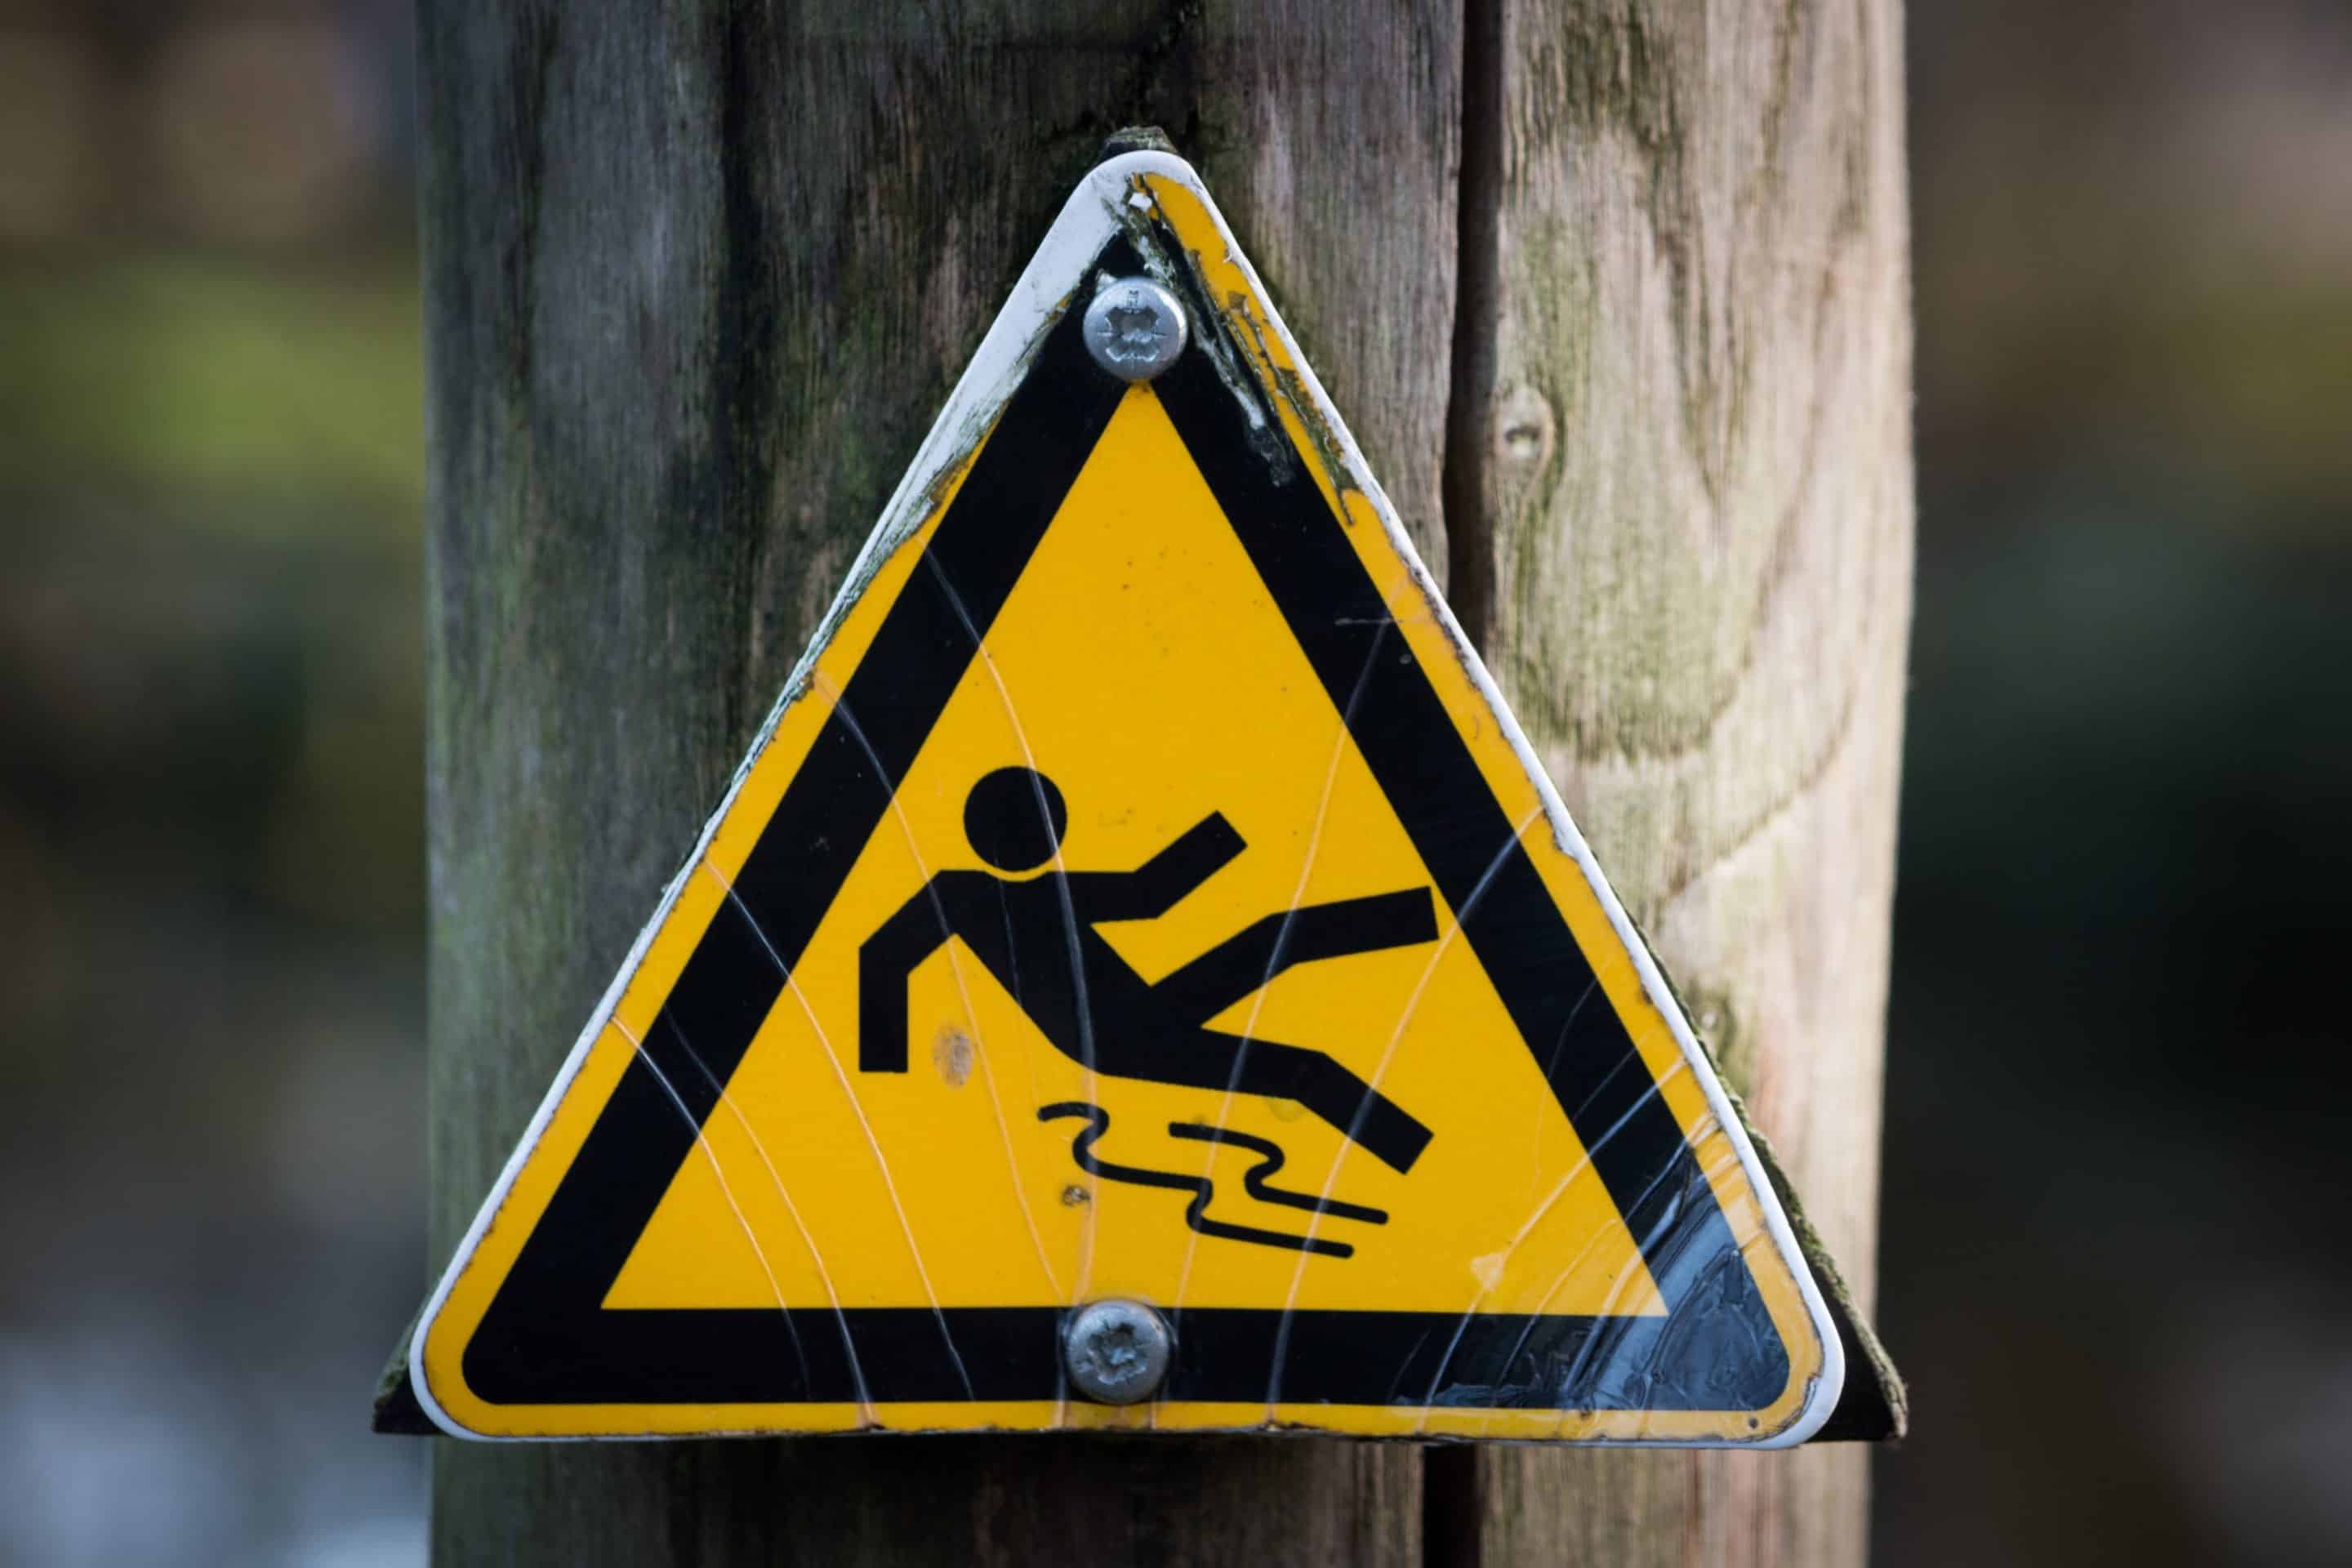 If you have been in a slip and fall, call the Traffic Accident Law Center to help you